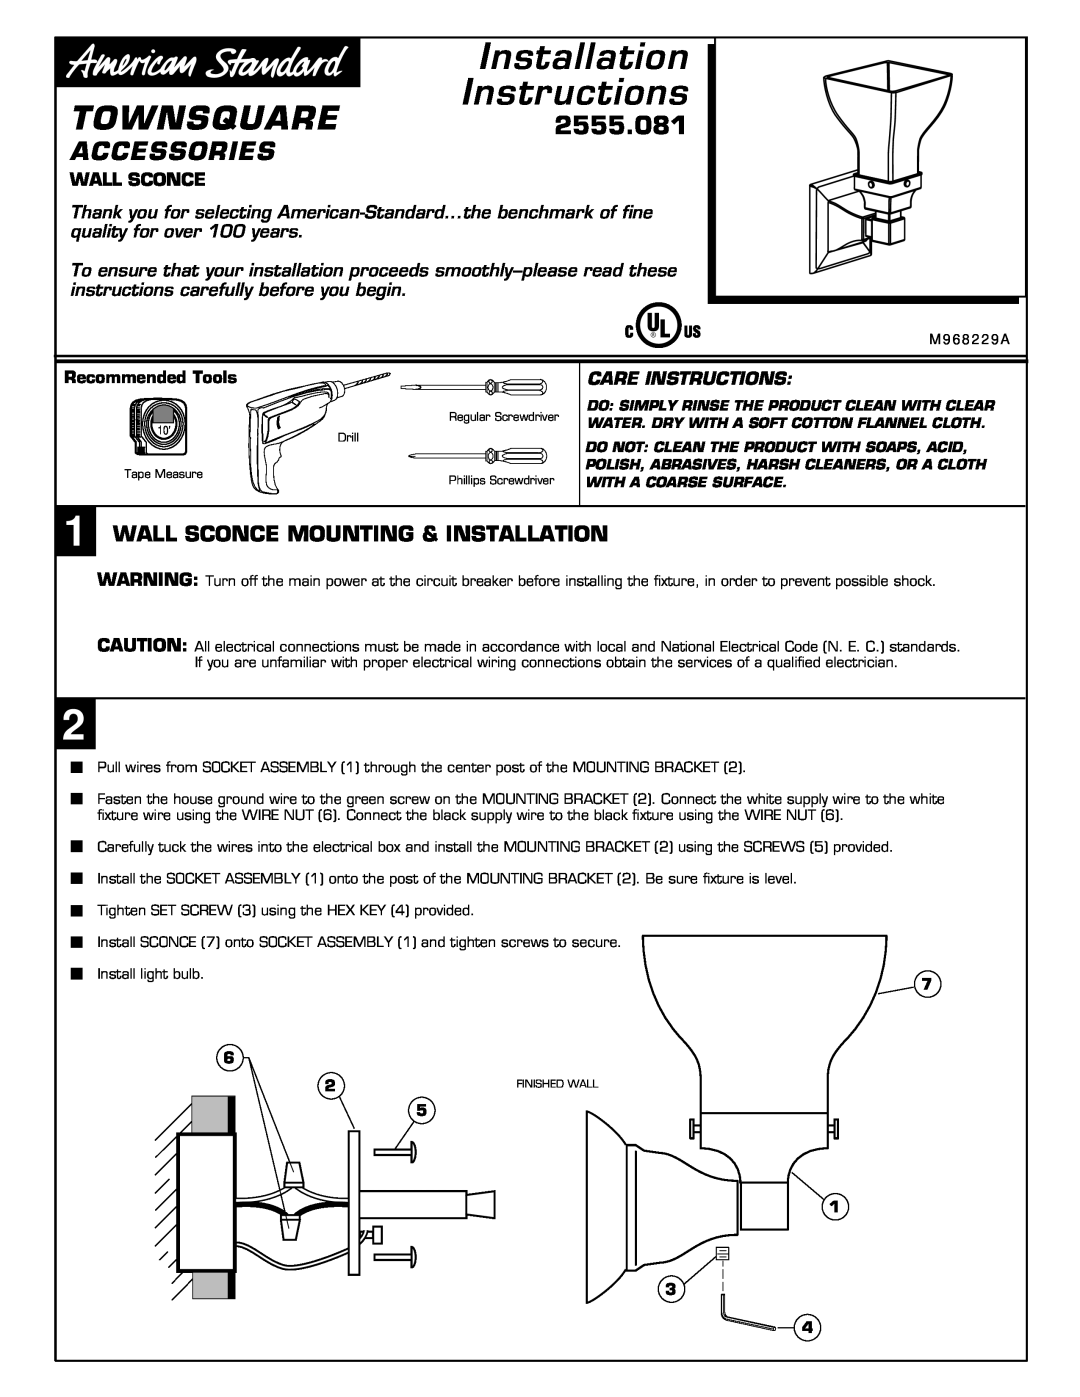 American Standard installation instructions TOWNSQUARE2555.081, Accessories, Wall Sconce, Recommended Tools 